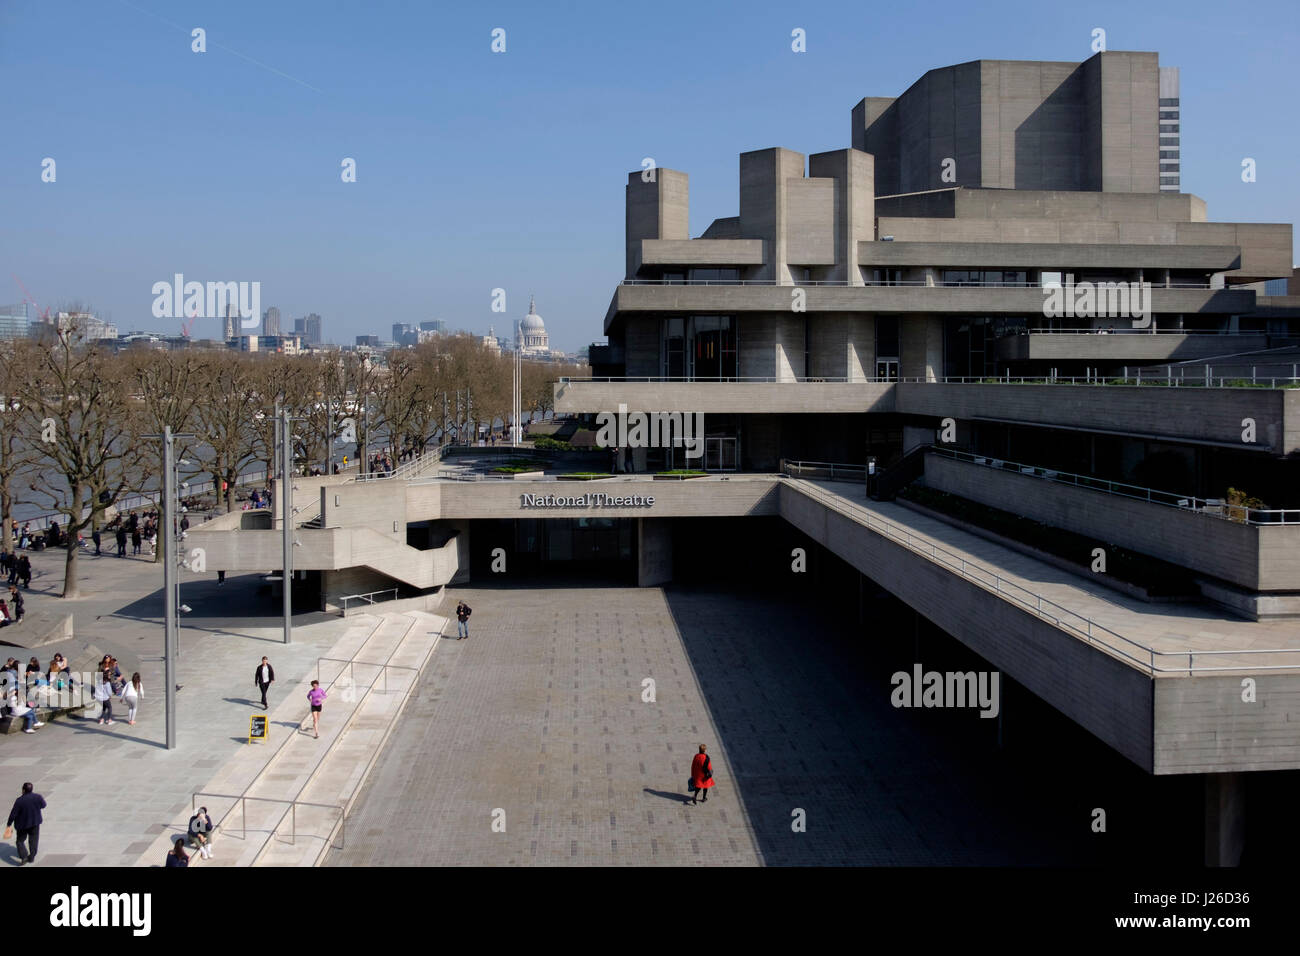 National Theatre in London, England, UK, Europe Stock Photo